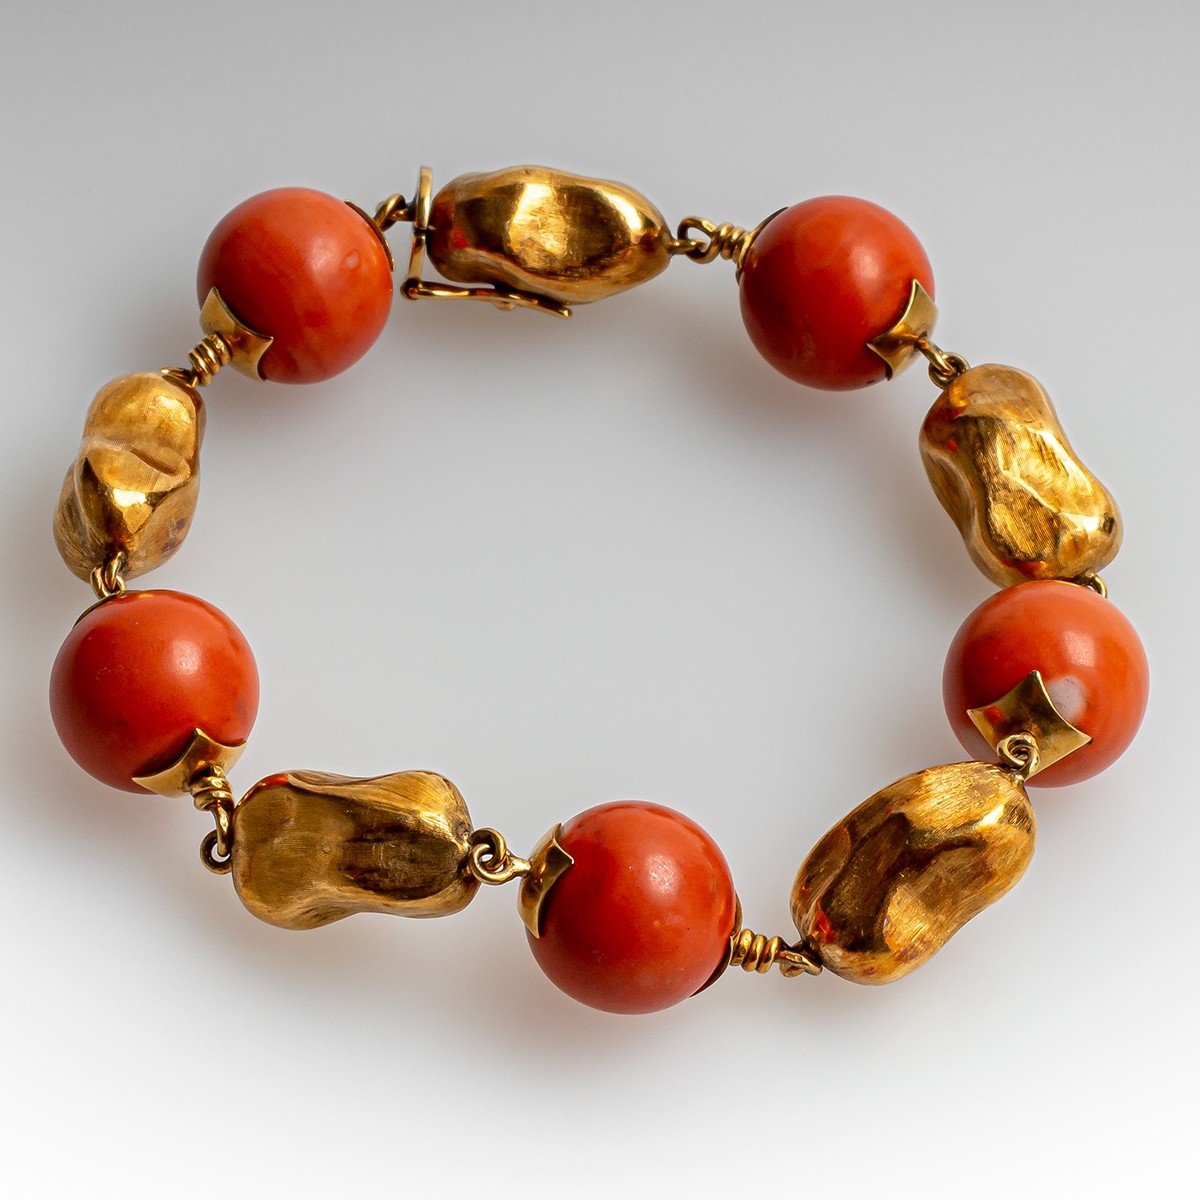 Victorian era 18K gold faceted coral cameo bracelet – Curiously timeless